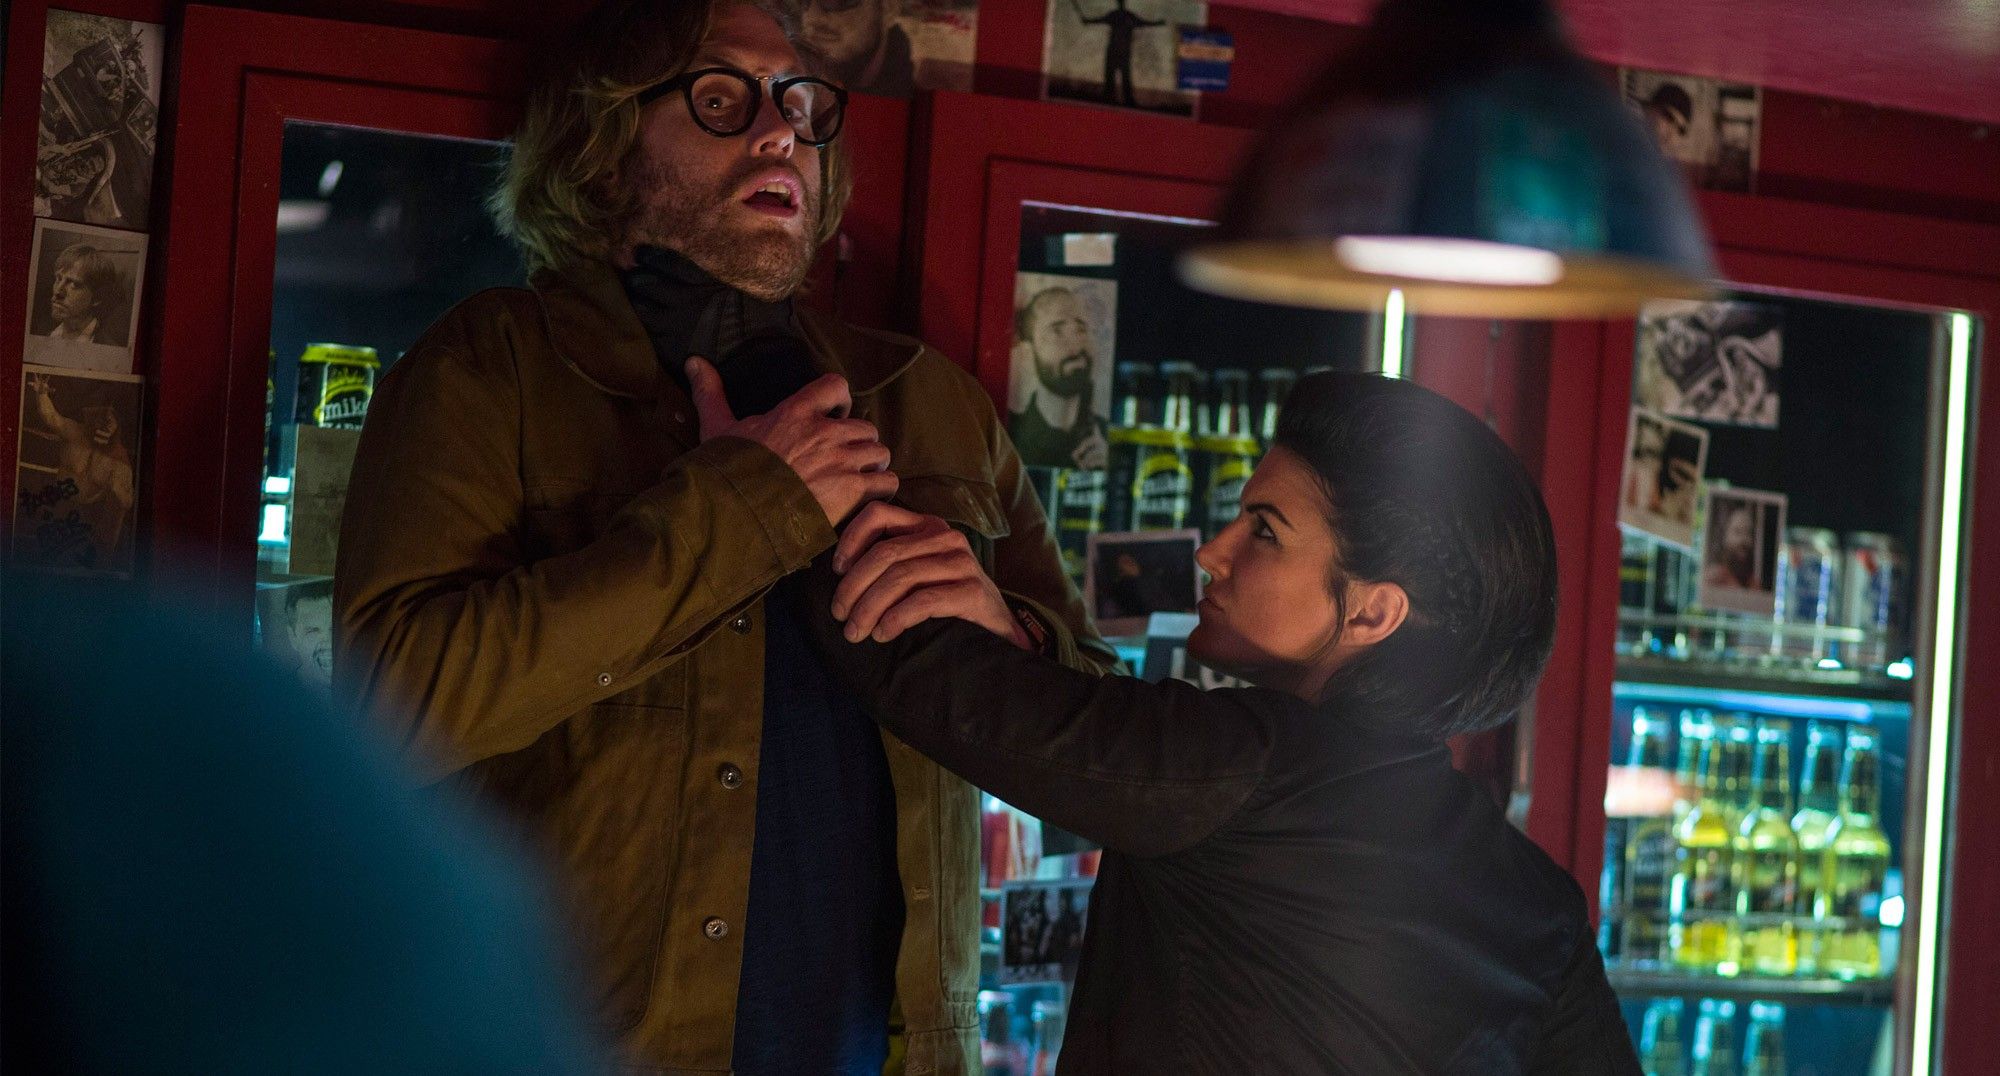 Deadpool Official Photo - TJ Miller and Gina Carano